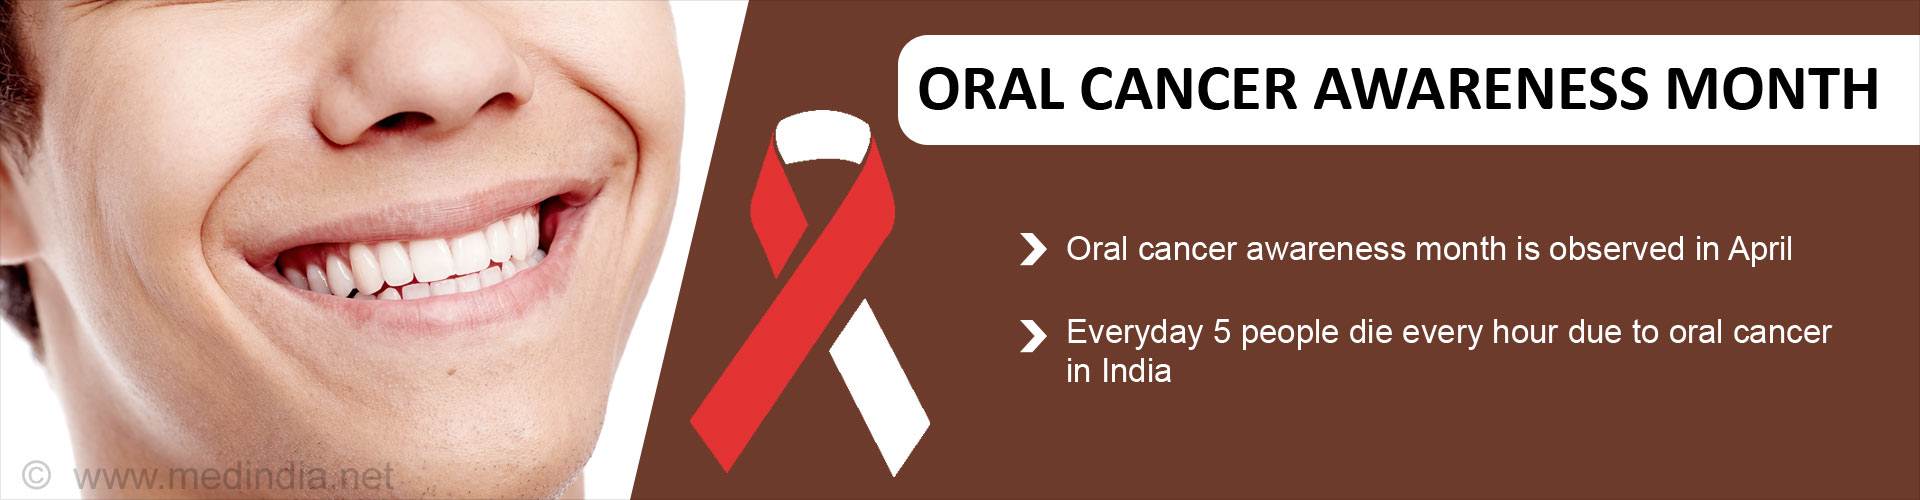 Oral cancer awareness month
- Oral cancer awareness month is observed in April
- Everyday 5 people die every hour due to oral cancer in India